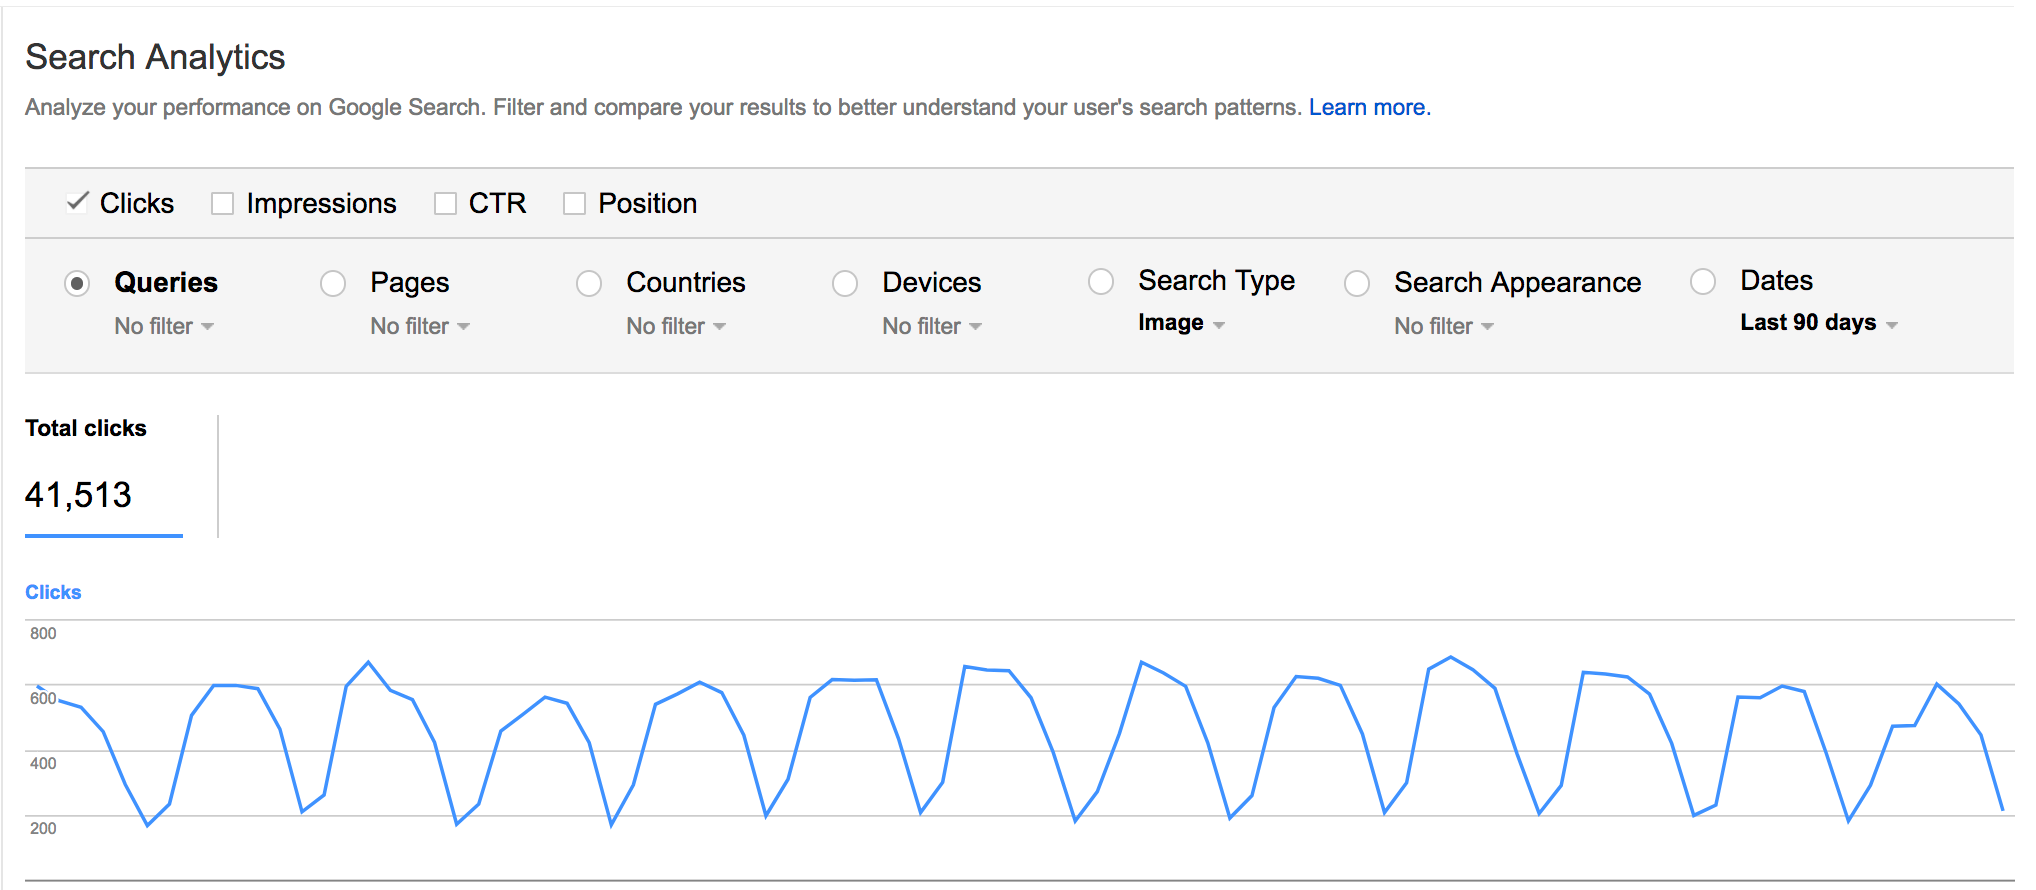 Track image search visits in Google Search Console. Go to Search Traffic > Search Analytics> Search Type: Image.